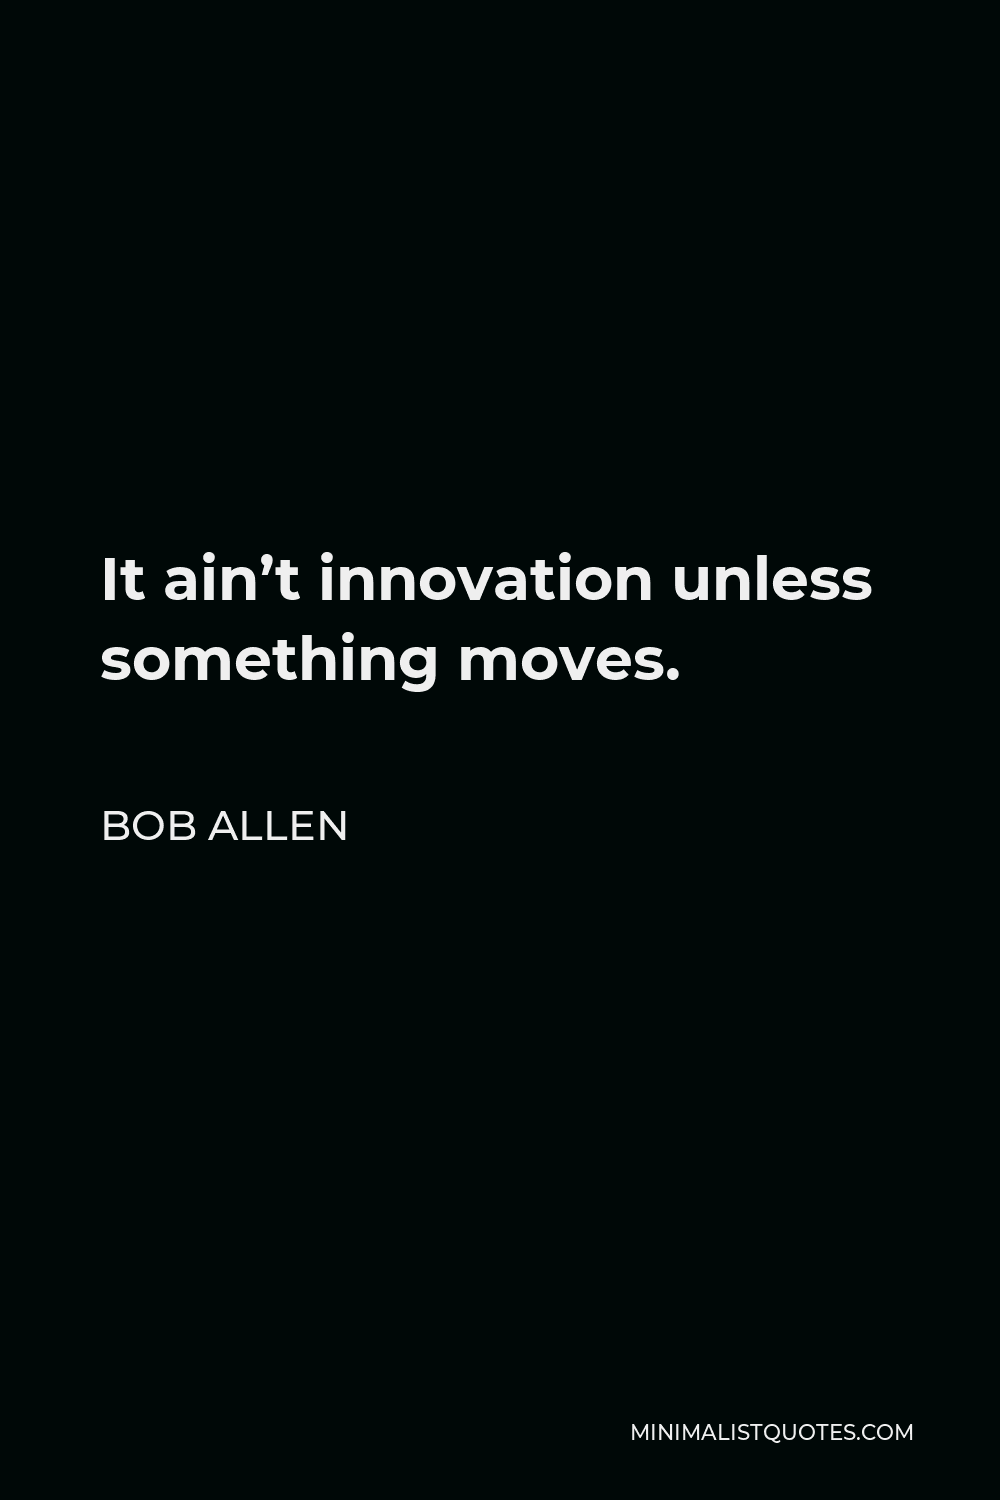 Bob Allen Quote - It ain’t innovation unless something moves.